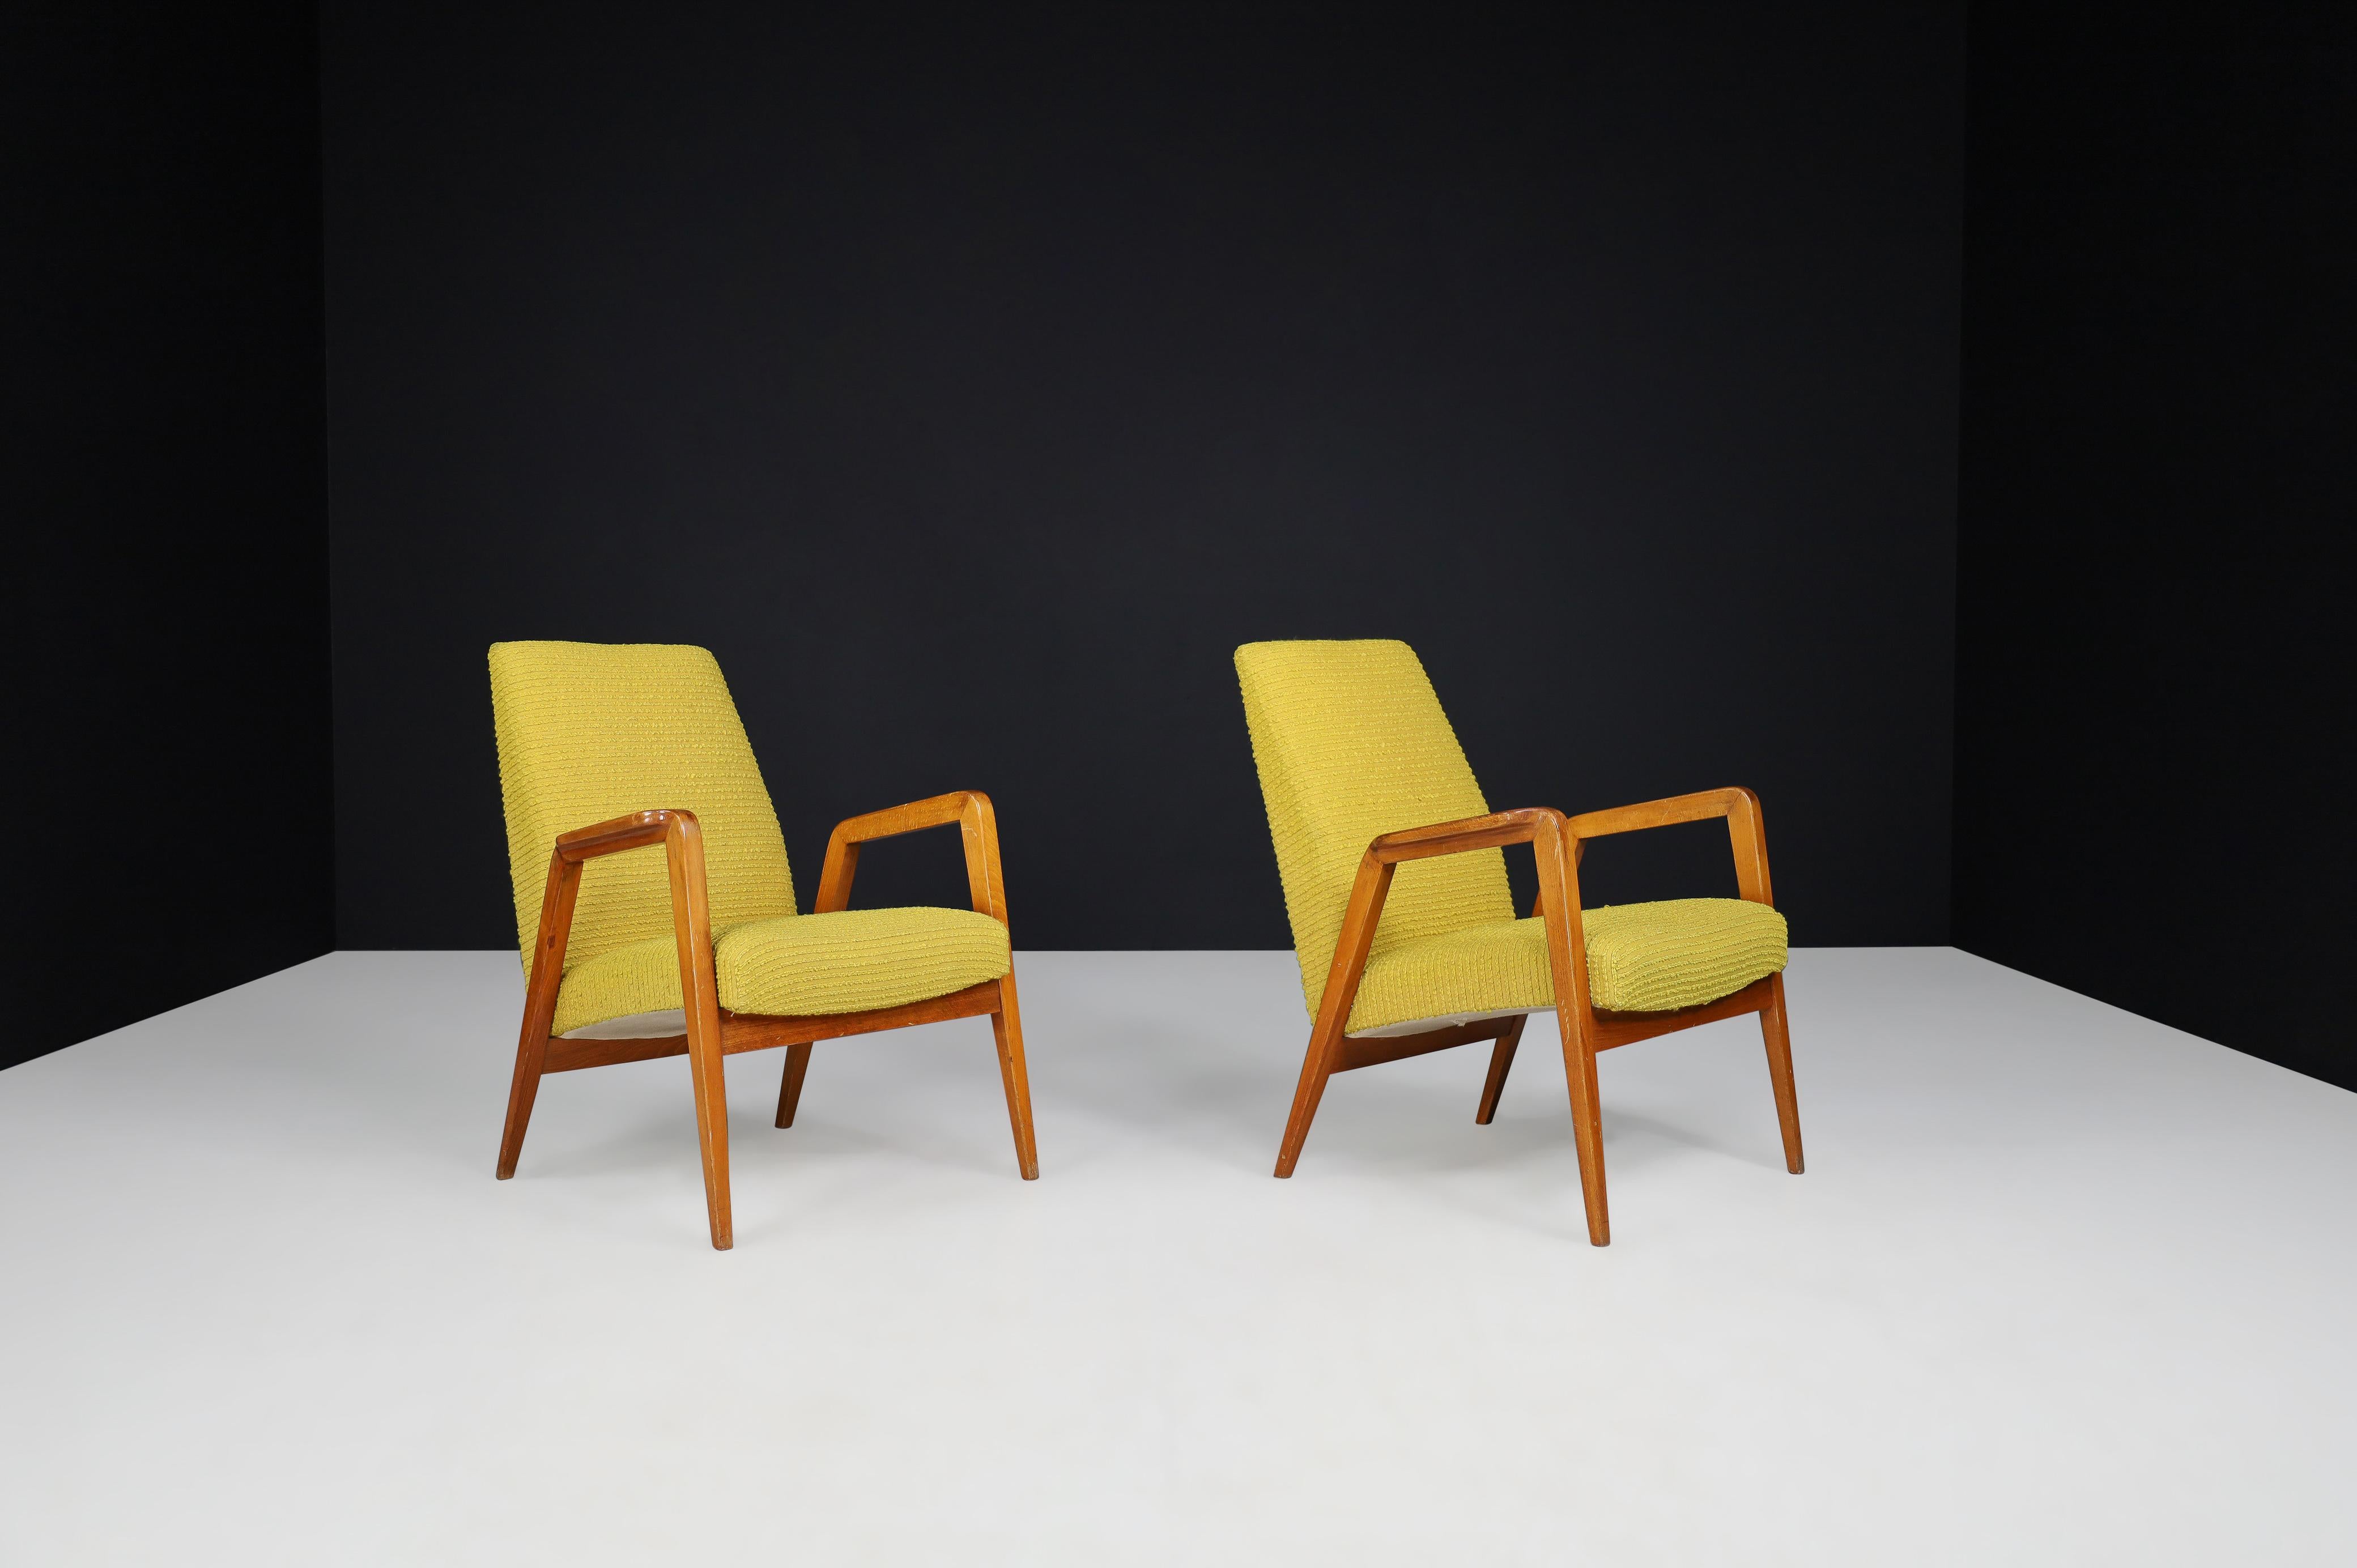 Czech Mid-Century Modern Lounge Chairs in Original Lemon Upholstery, Praque 1950s  For Sale